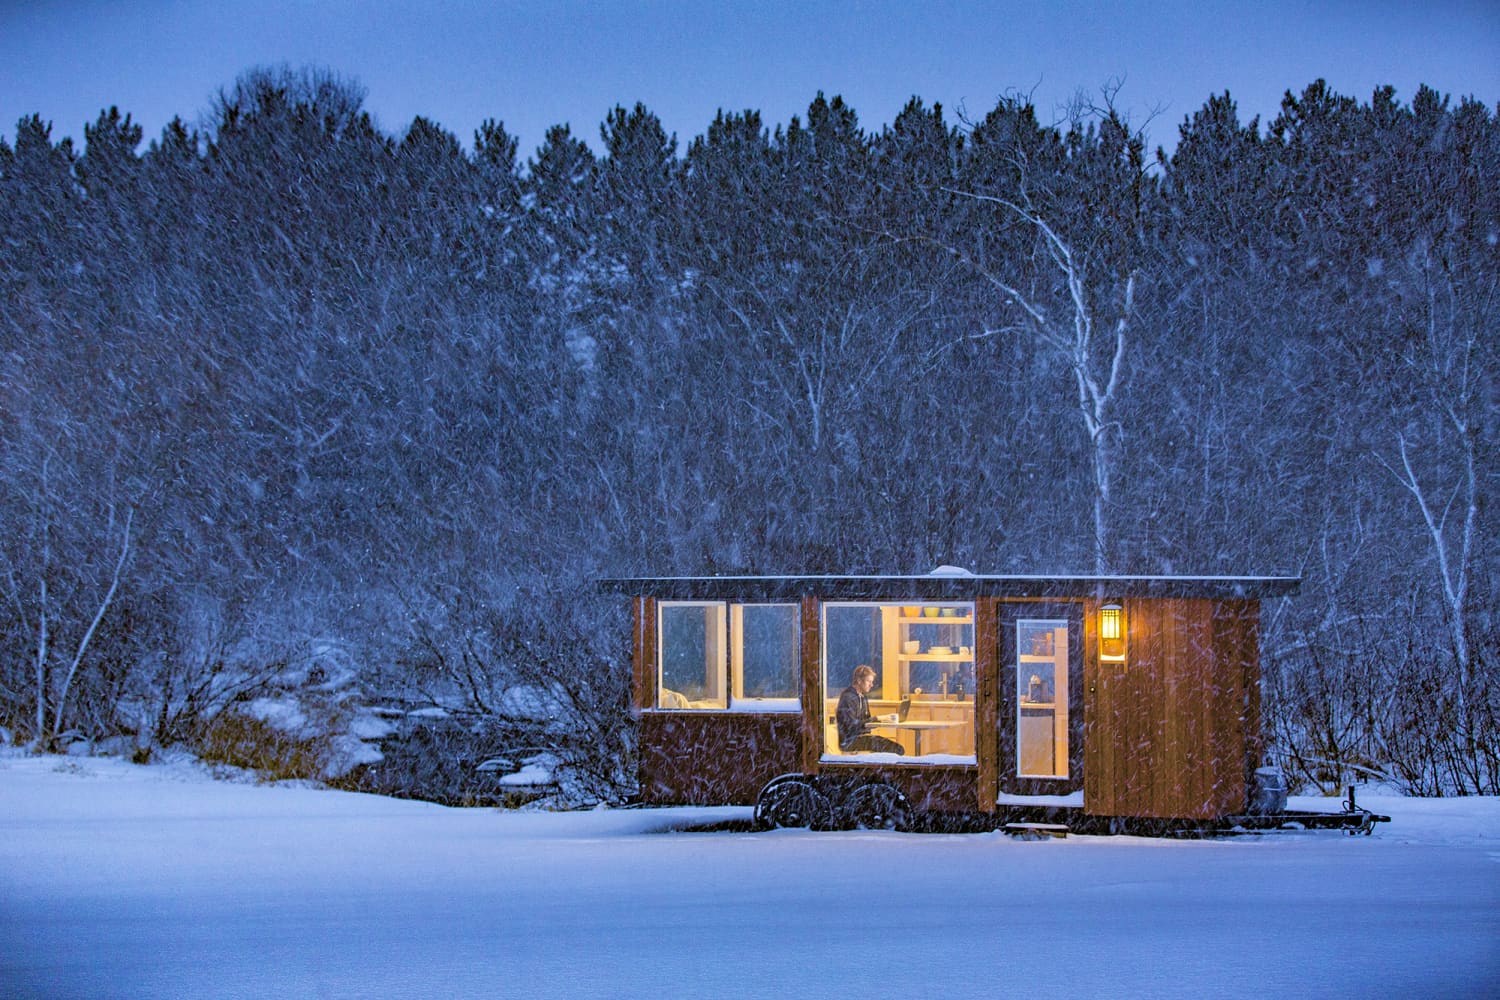 If You’re Ready to Give Up on Everything and Move to the Country Forever, This is the Tiny House for You